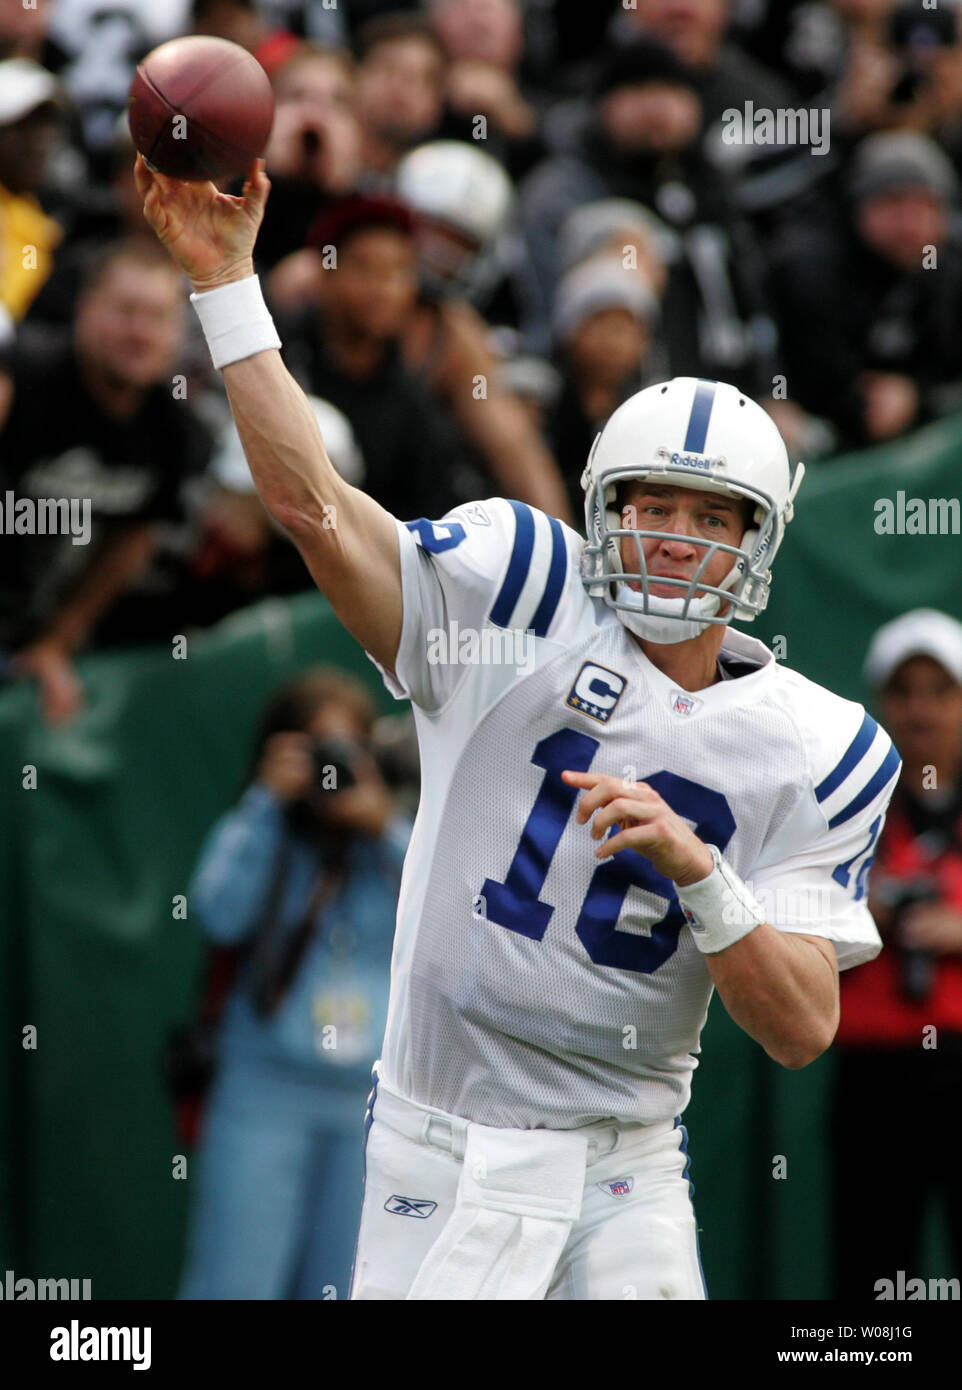 Indianapolis Colts QB Peyton Manning fires a pass against the Oakland Raiders in the fourth quarter at Oracle Coliseum in Oakland, California on December 16, 2007.  The Colts defeated the Raiders 21-14.  (UPI Photo/Terry Schmitt) Stock Photo